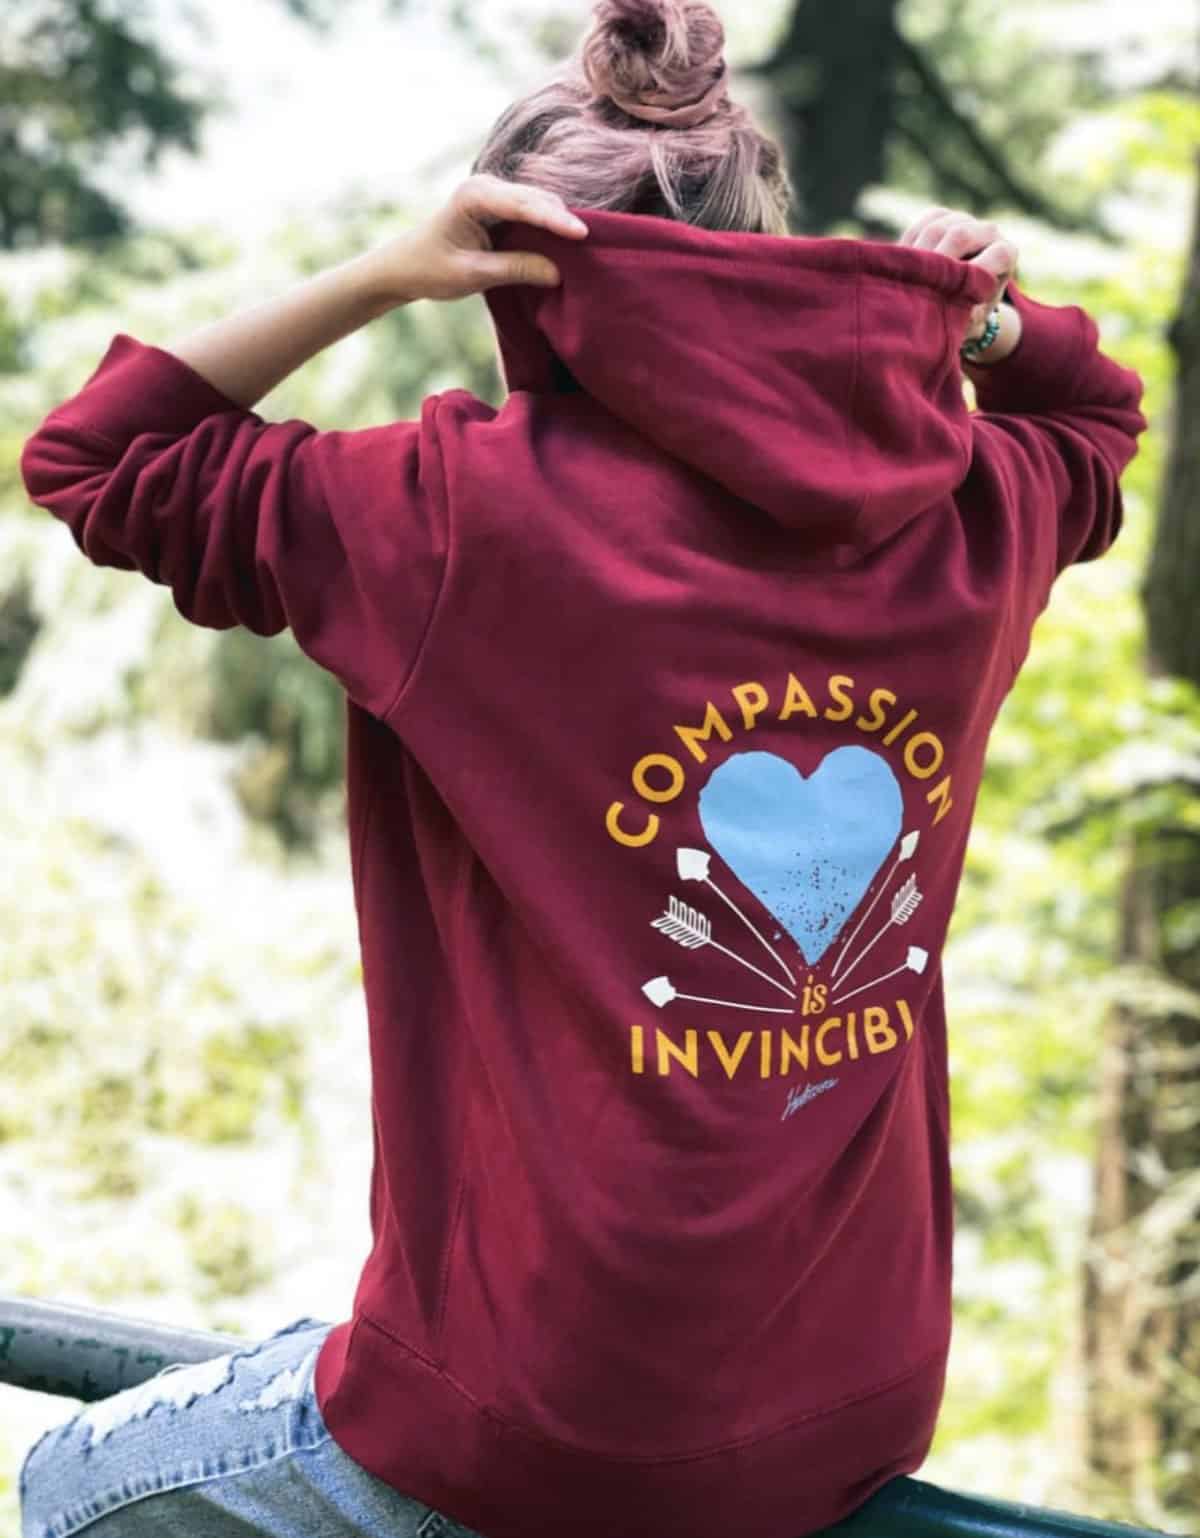 maroon vegan hoodie from herbivore clothing that says compassion is invincible